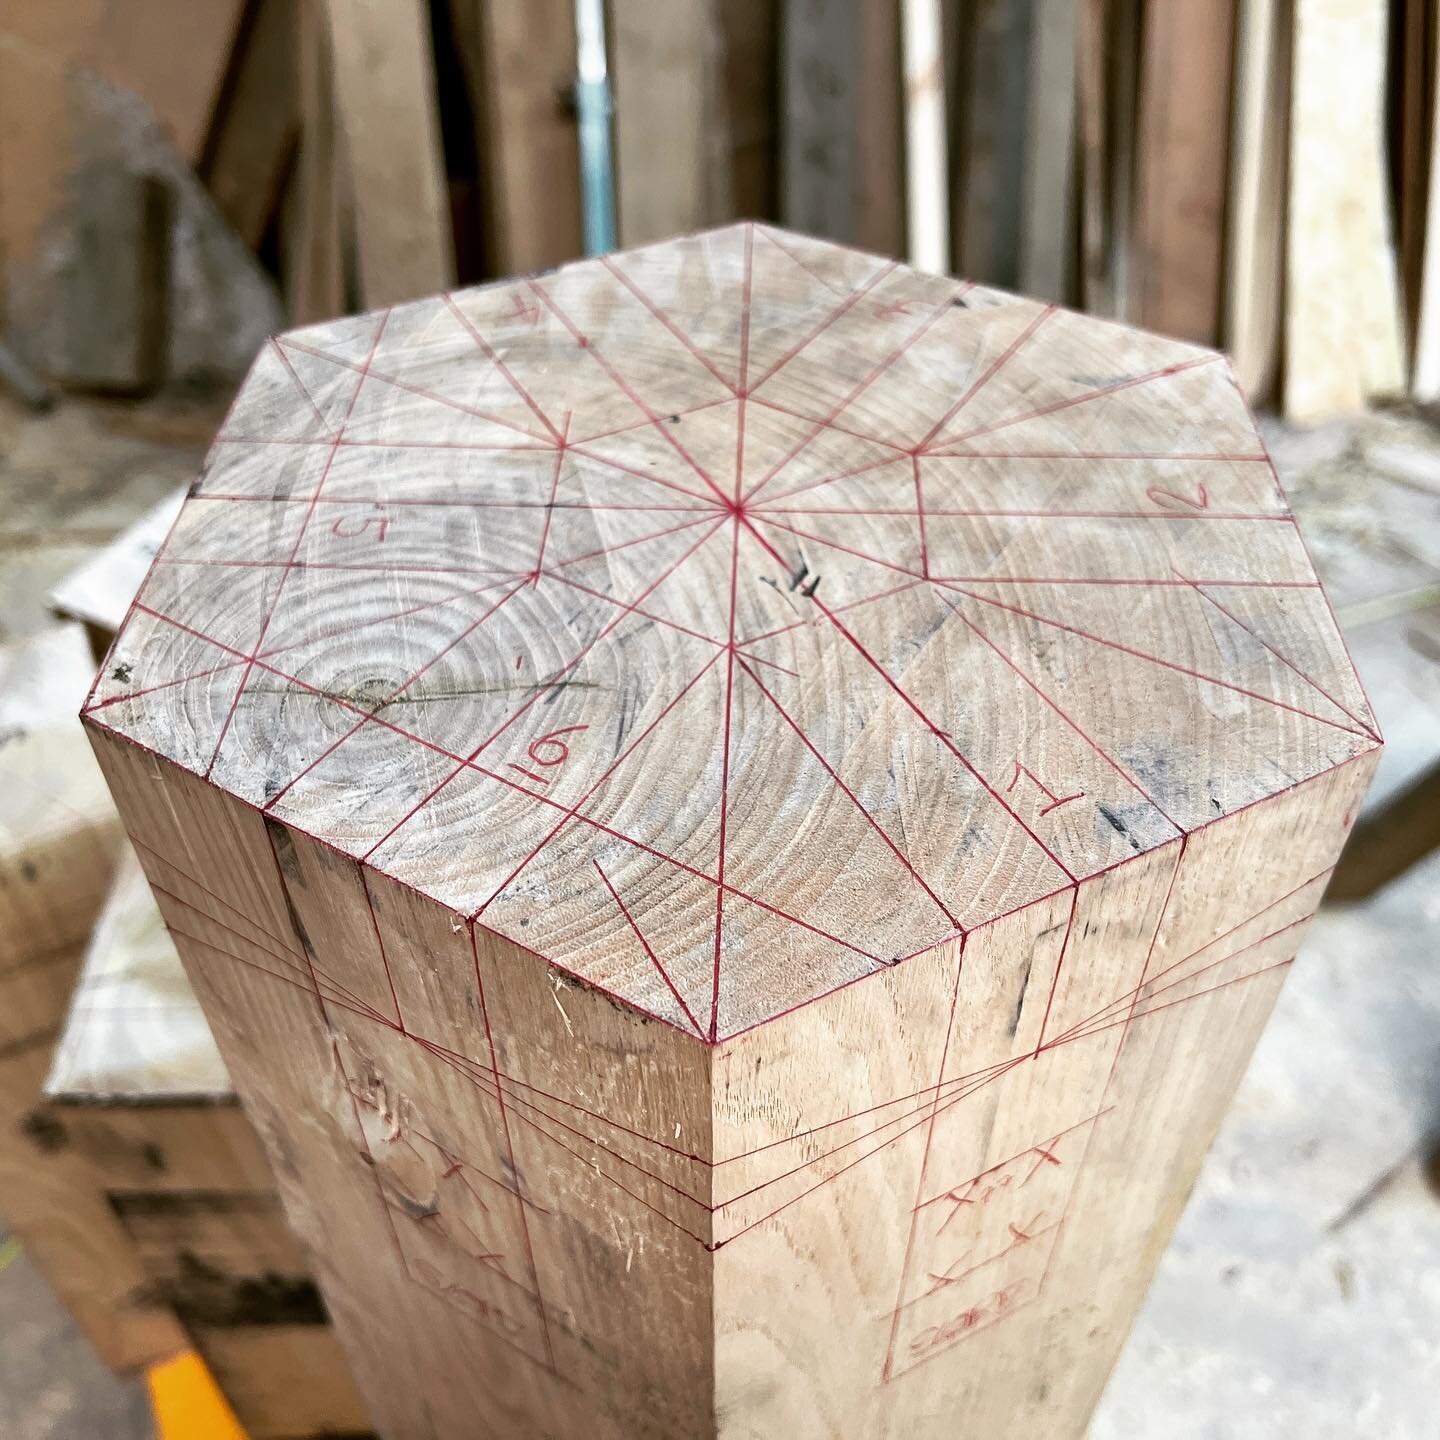 Sweet Chestnut central pendant for a hexagonal roof structure. 

#roofgeometry 
#timberframebuildings